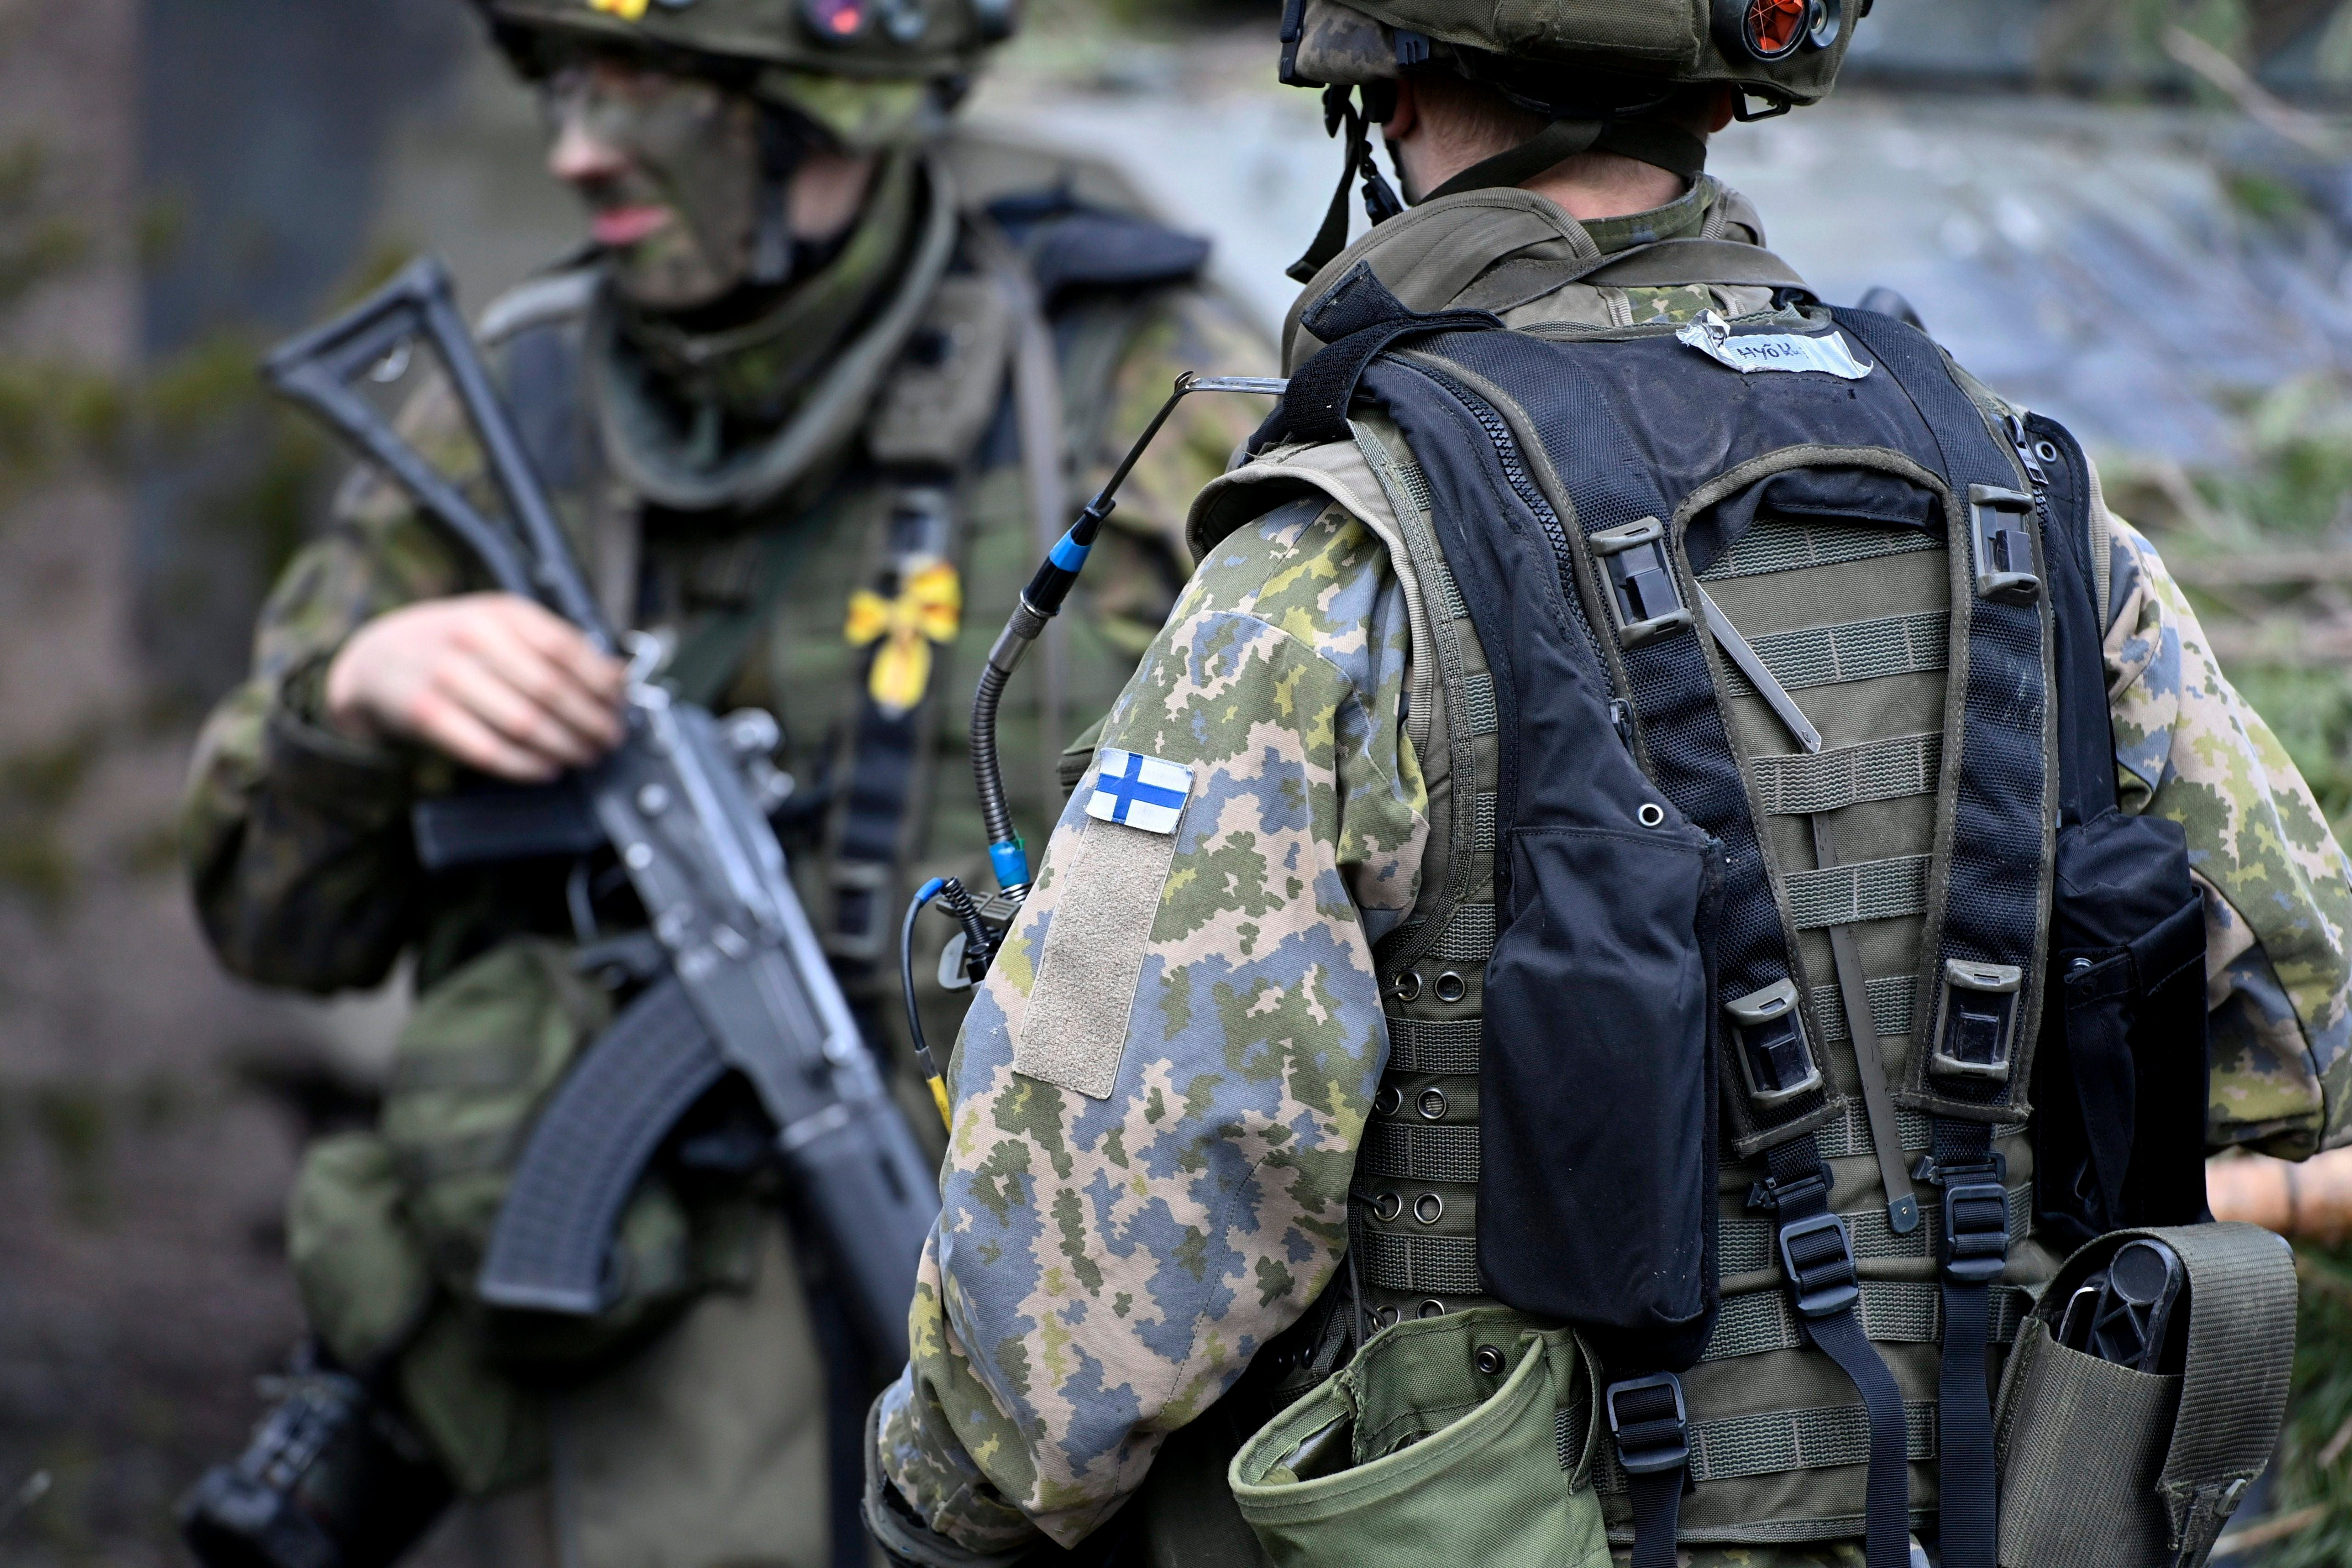 An application process will now begin for Finland to join Nato